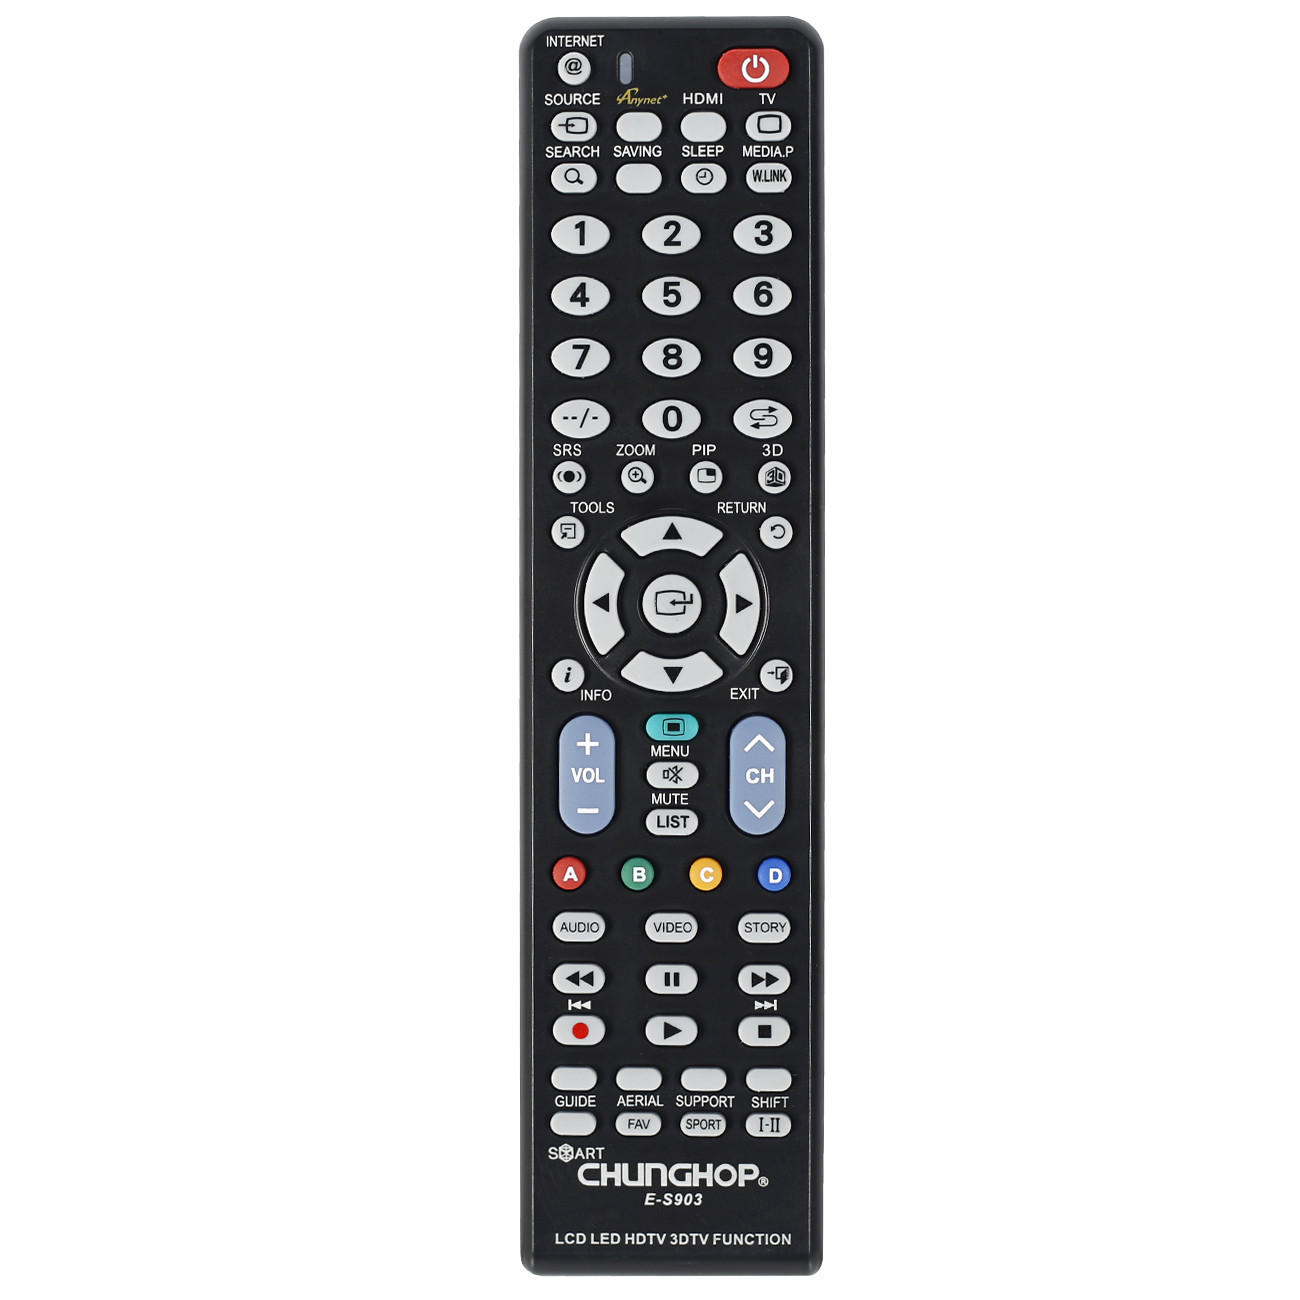 

Chunghop Universal TV Remote Control for Samsung E-S903 LCD LED HDTV